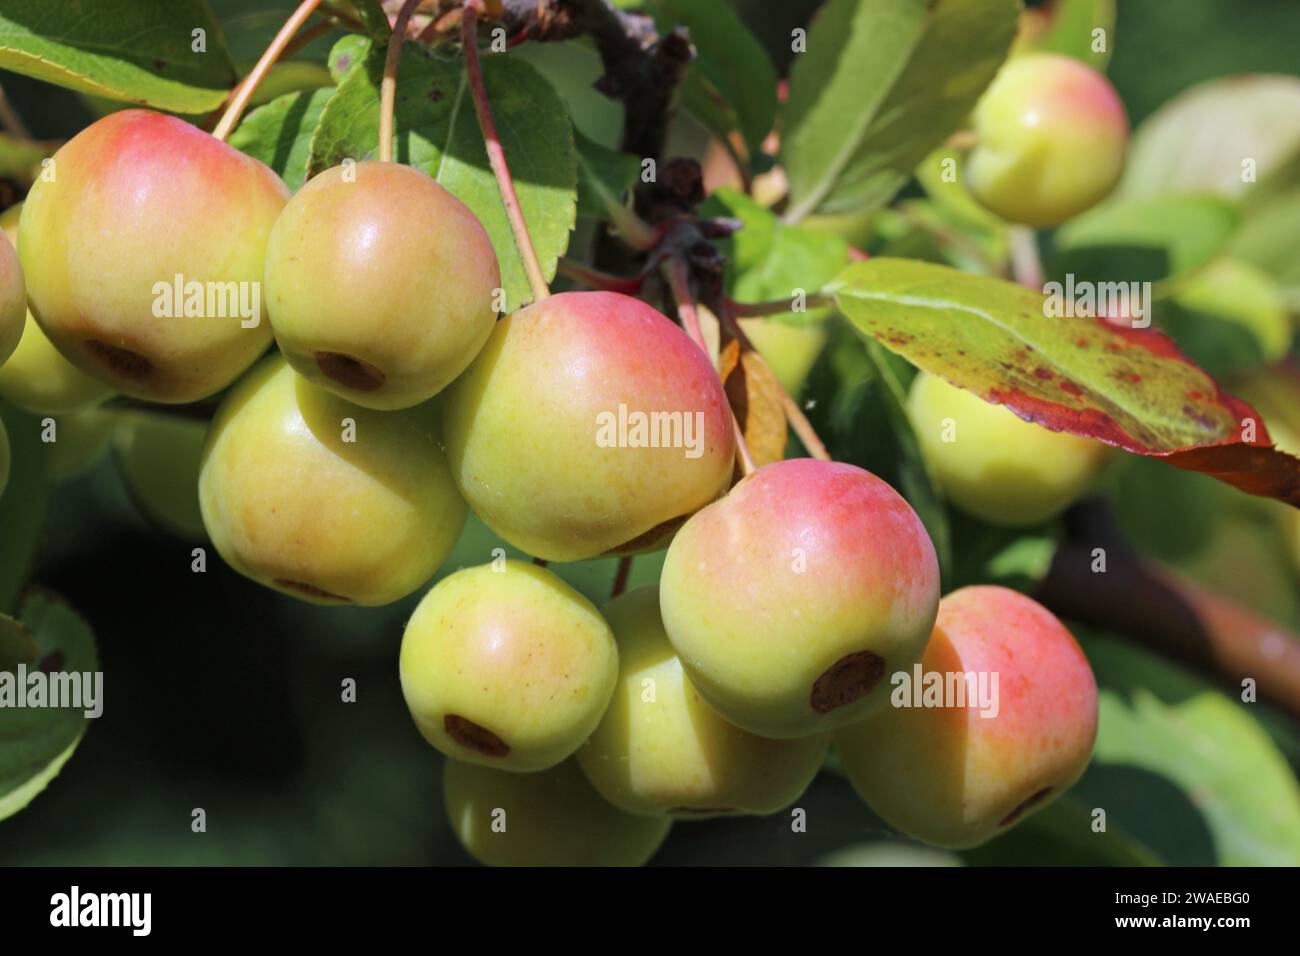 Ripening crab apples, Malus x robusta variety red sentinel, hanging on a tree with a background of blurred leaves. Stock Photo